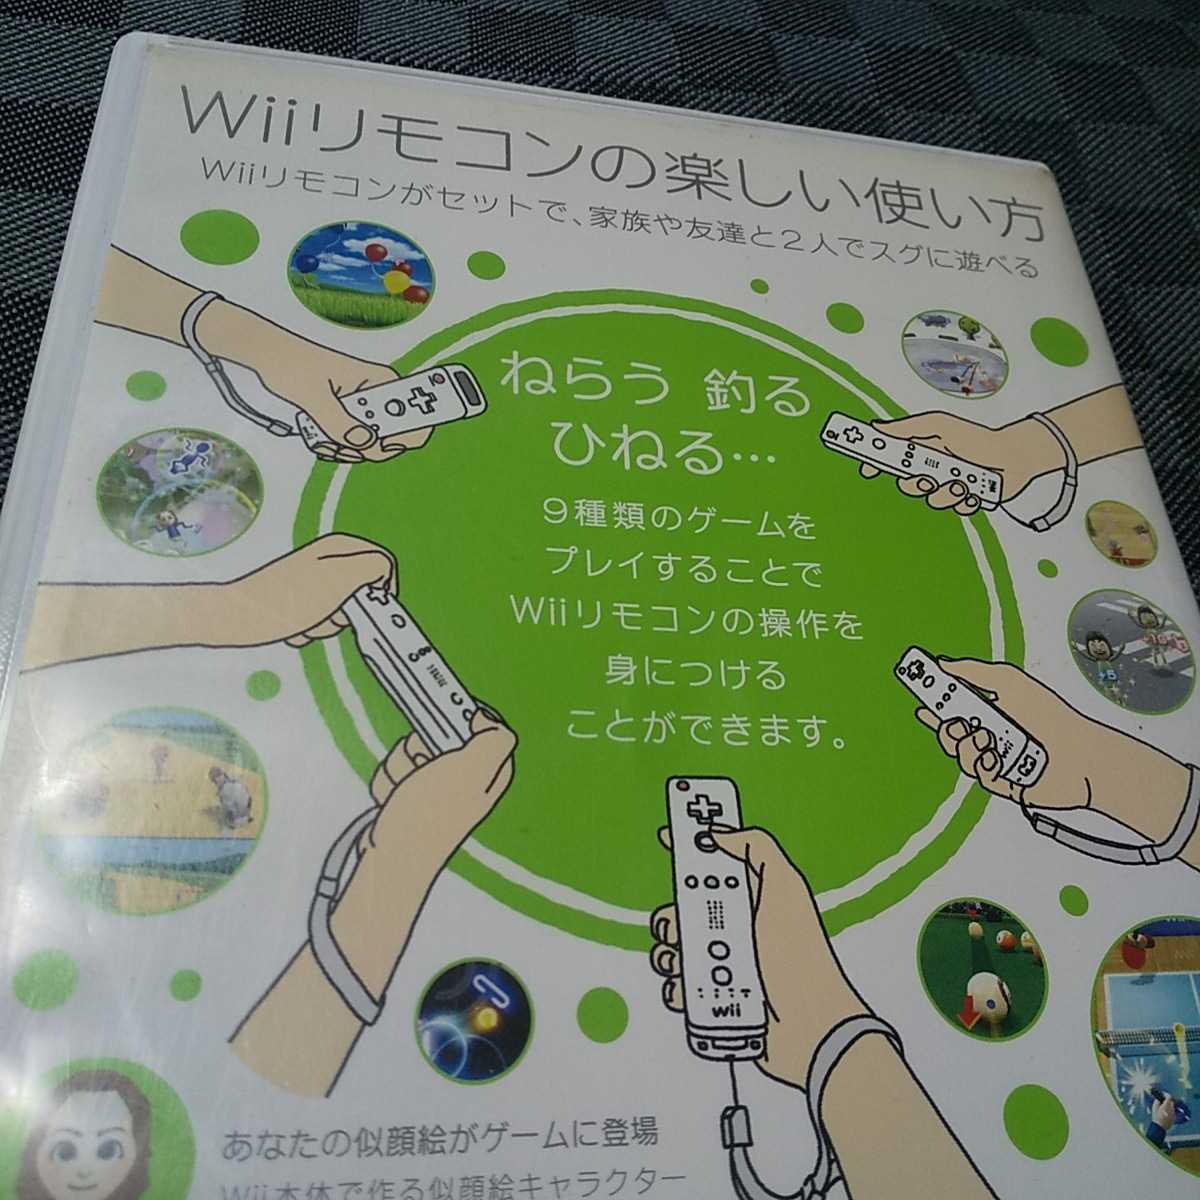 Wii【はじめてのWii】任天堂　［送料無料］返金保証あり